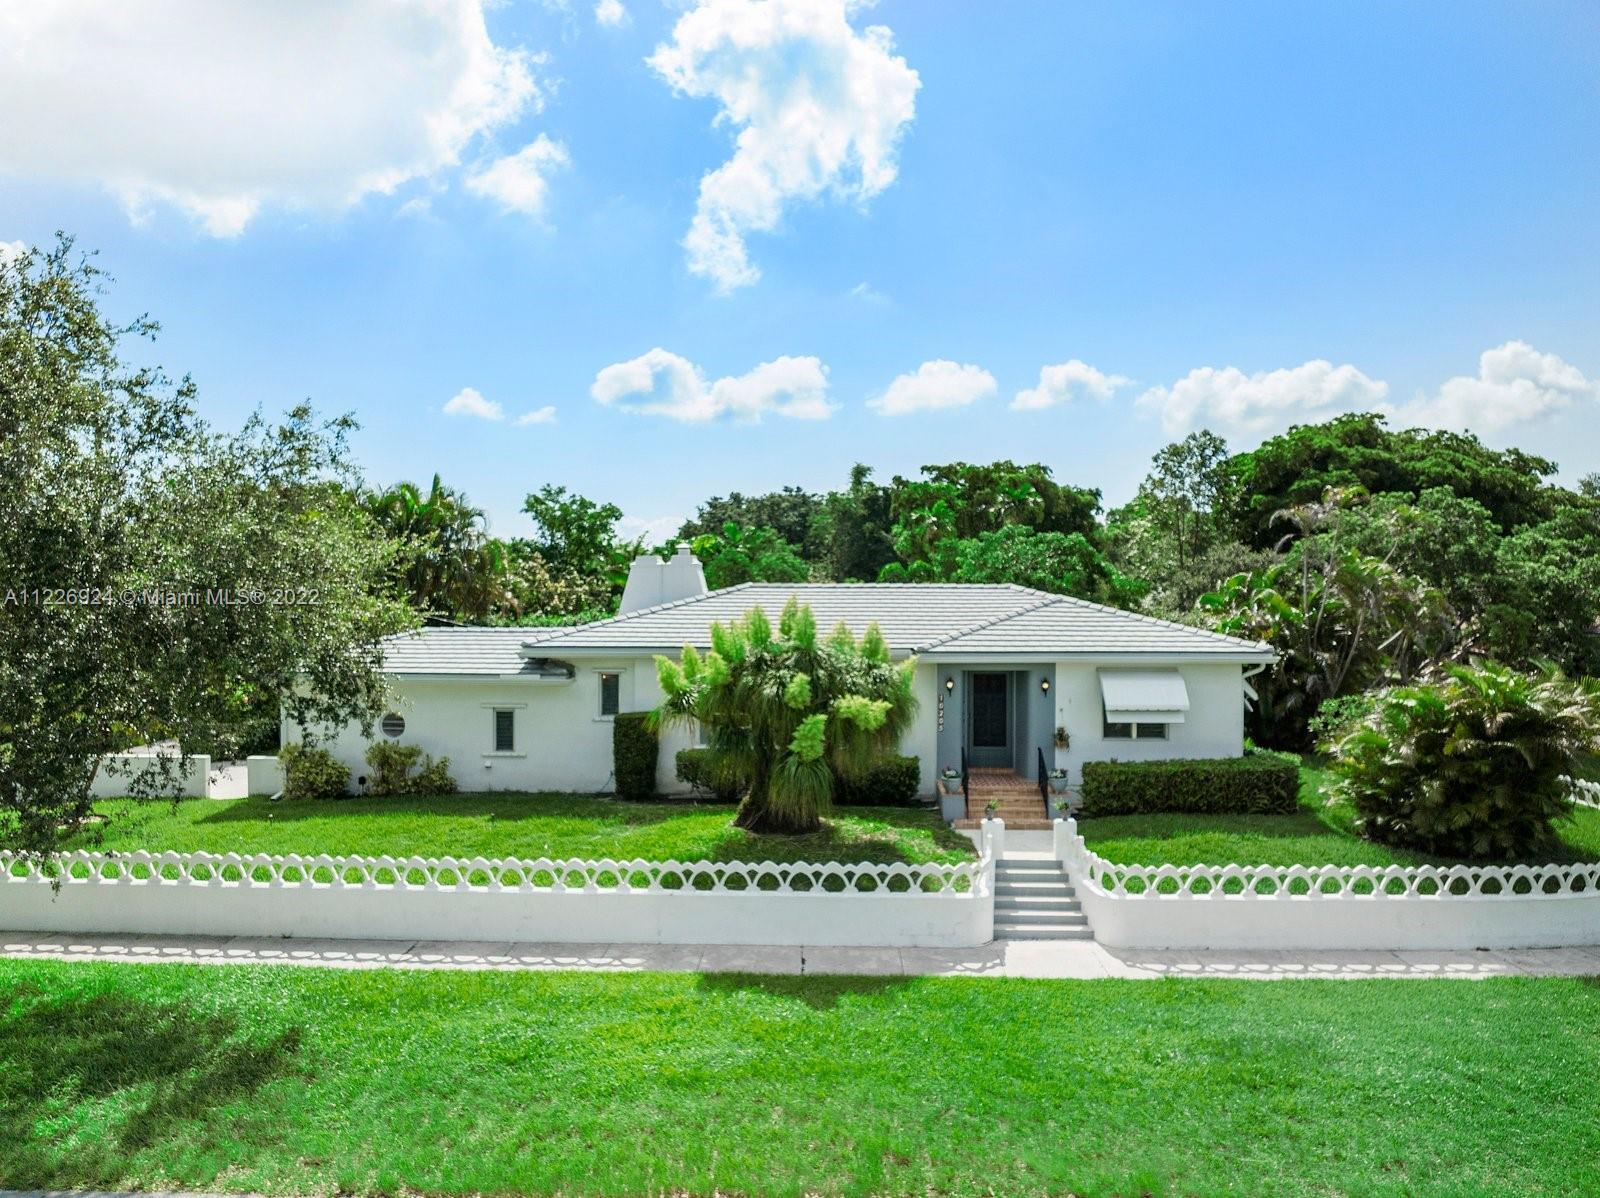 Character sets the stage for this one of a kind Central Miami Shores home! Enjoy the elegance of 193